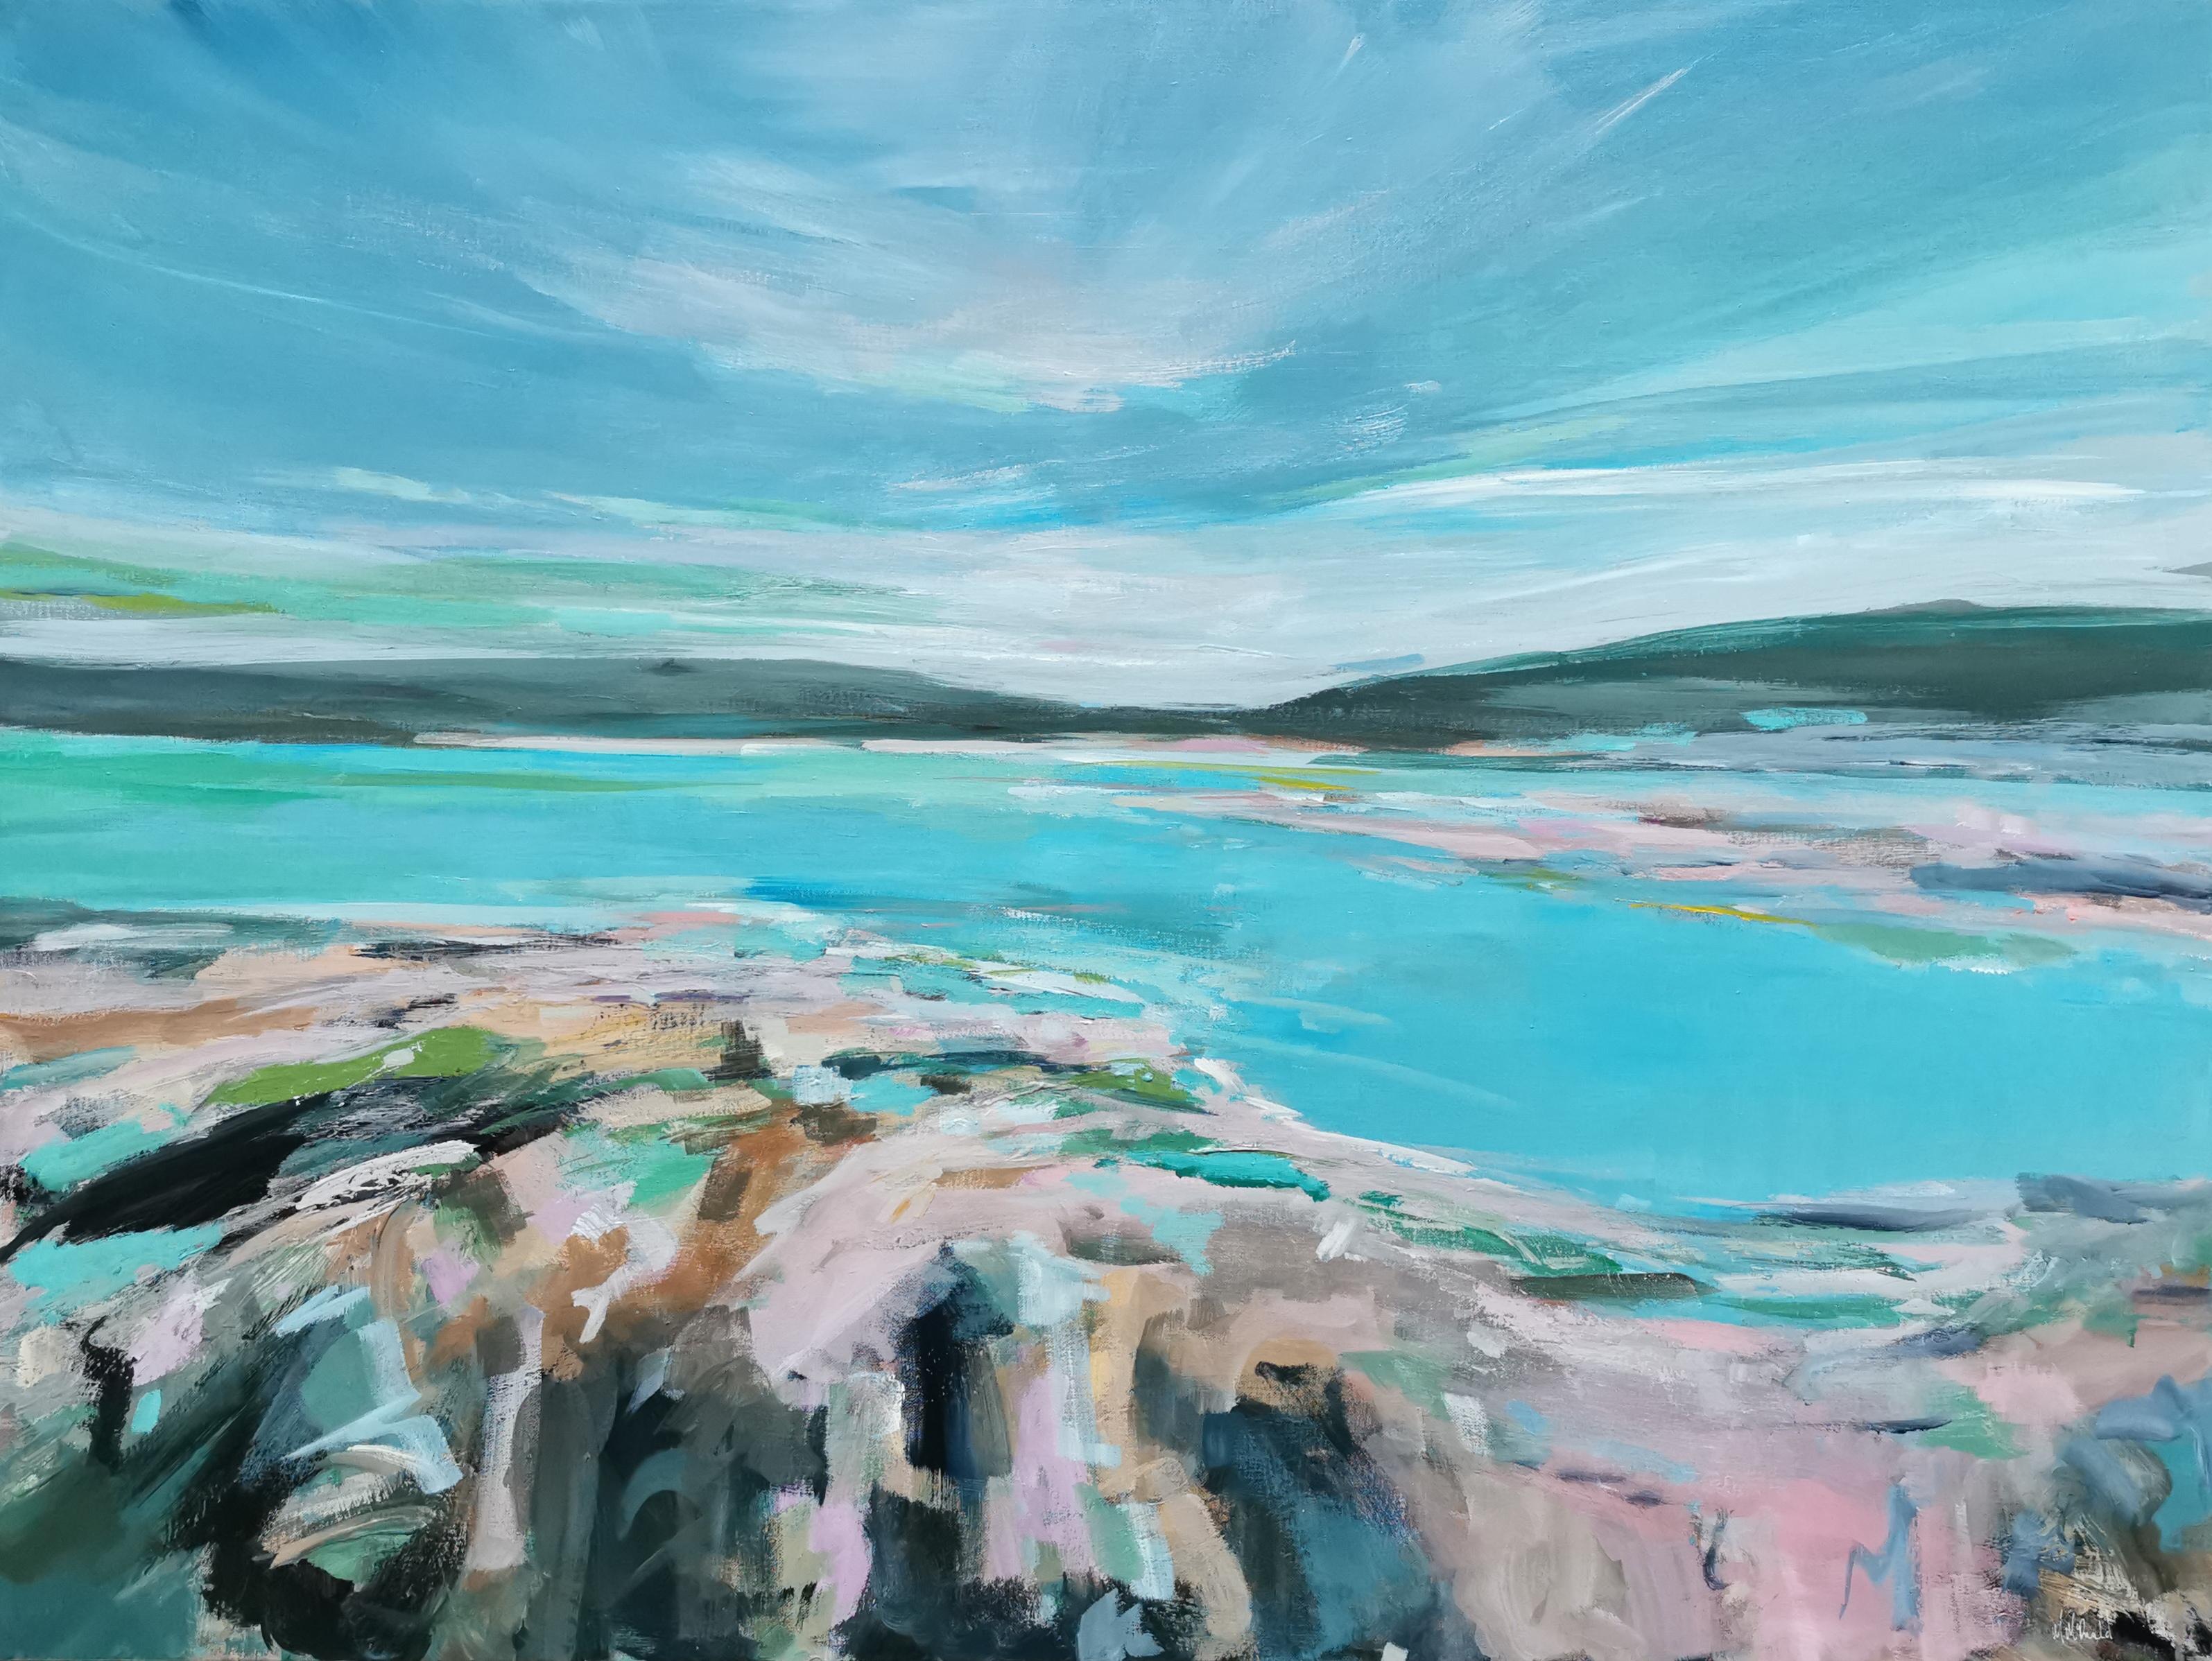 Landscape Painting Mary McDonald - Whispering Sky, River Clyde, Scotland, Original painting, Seascape, Contemporary